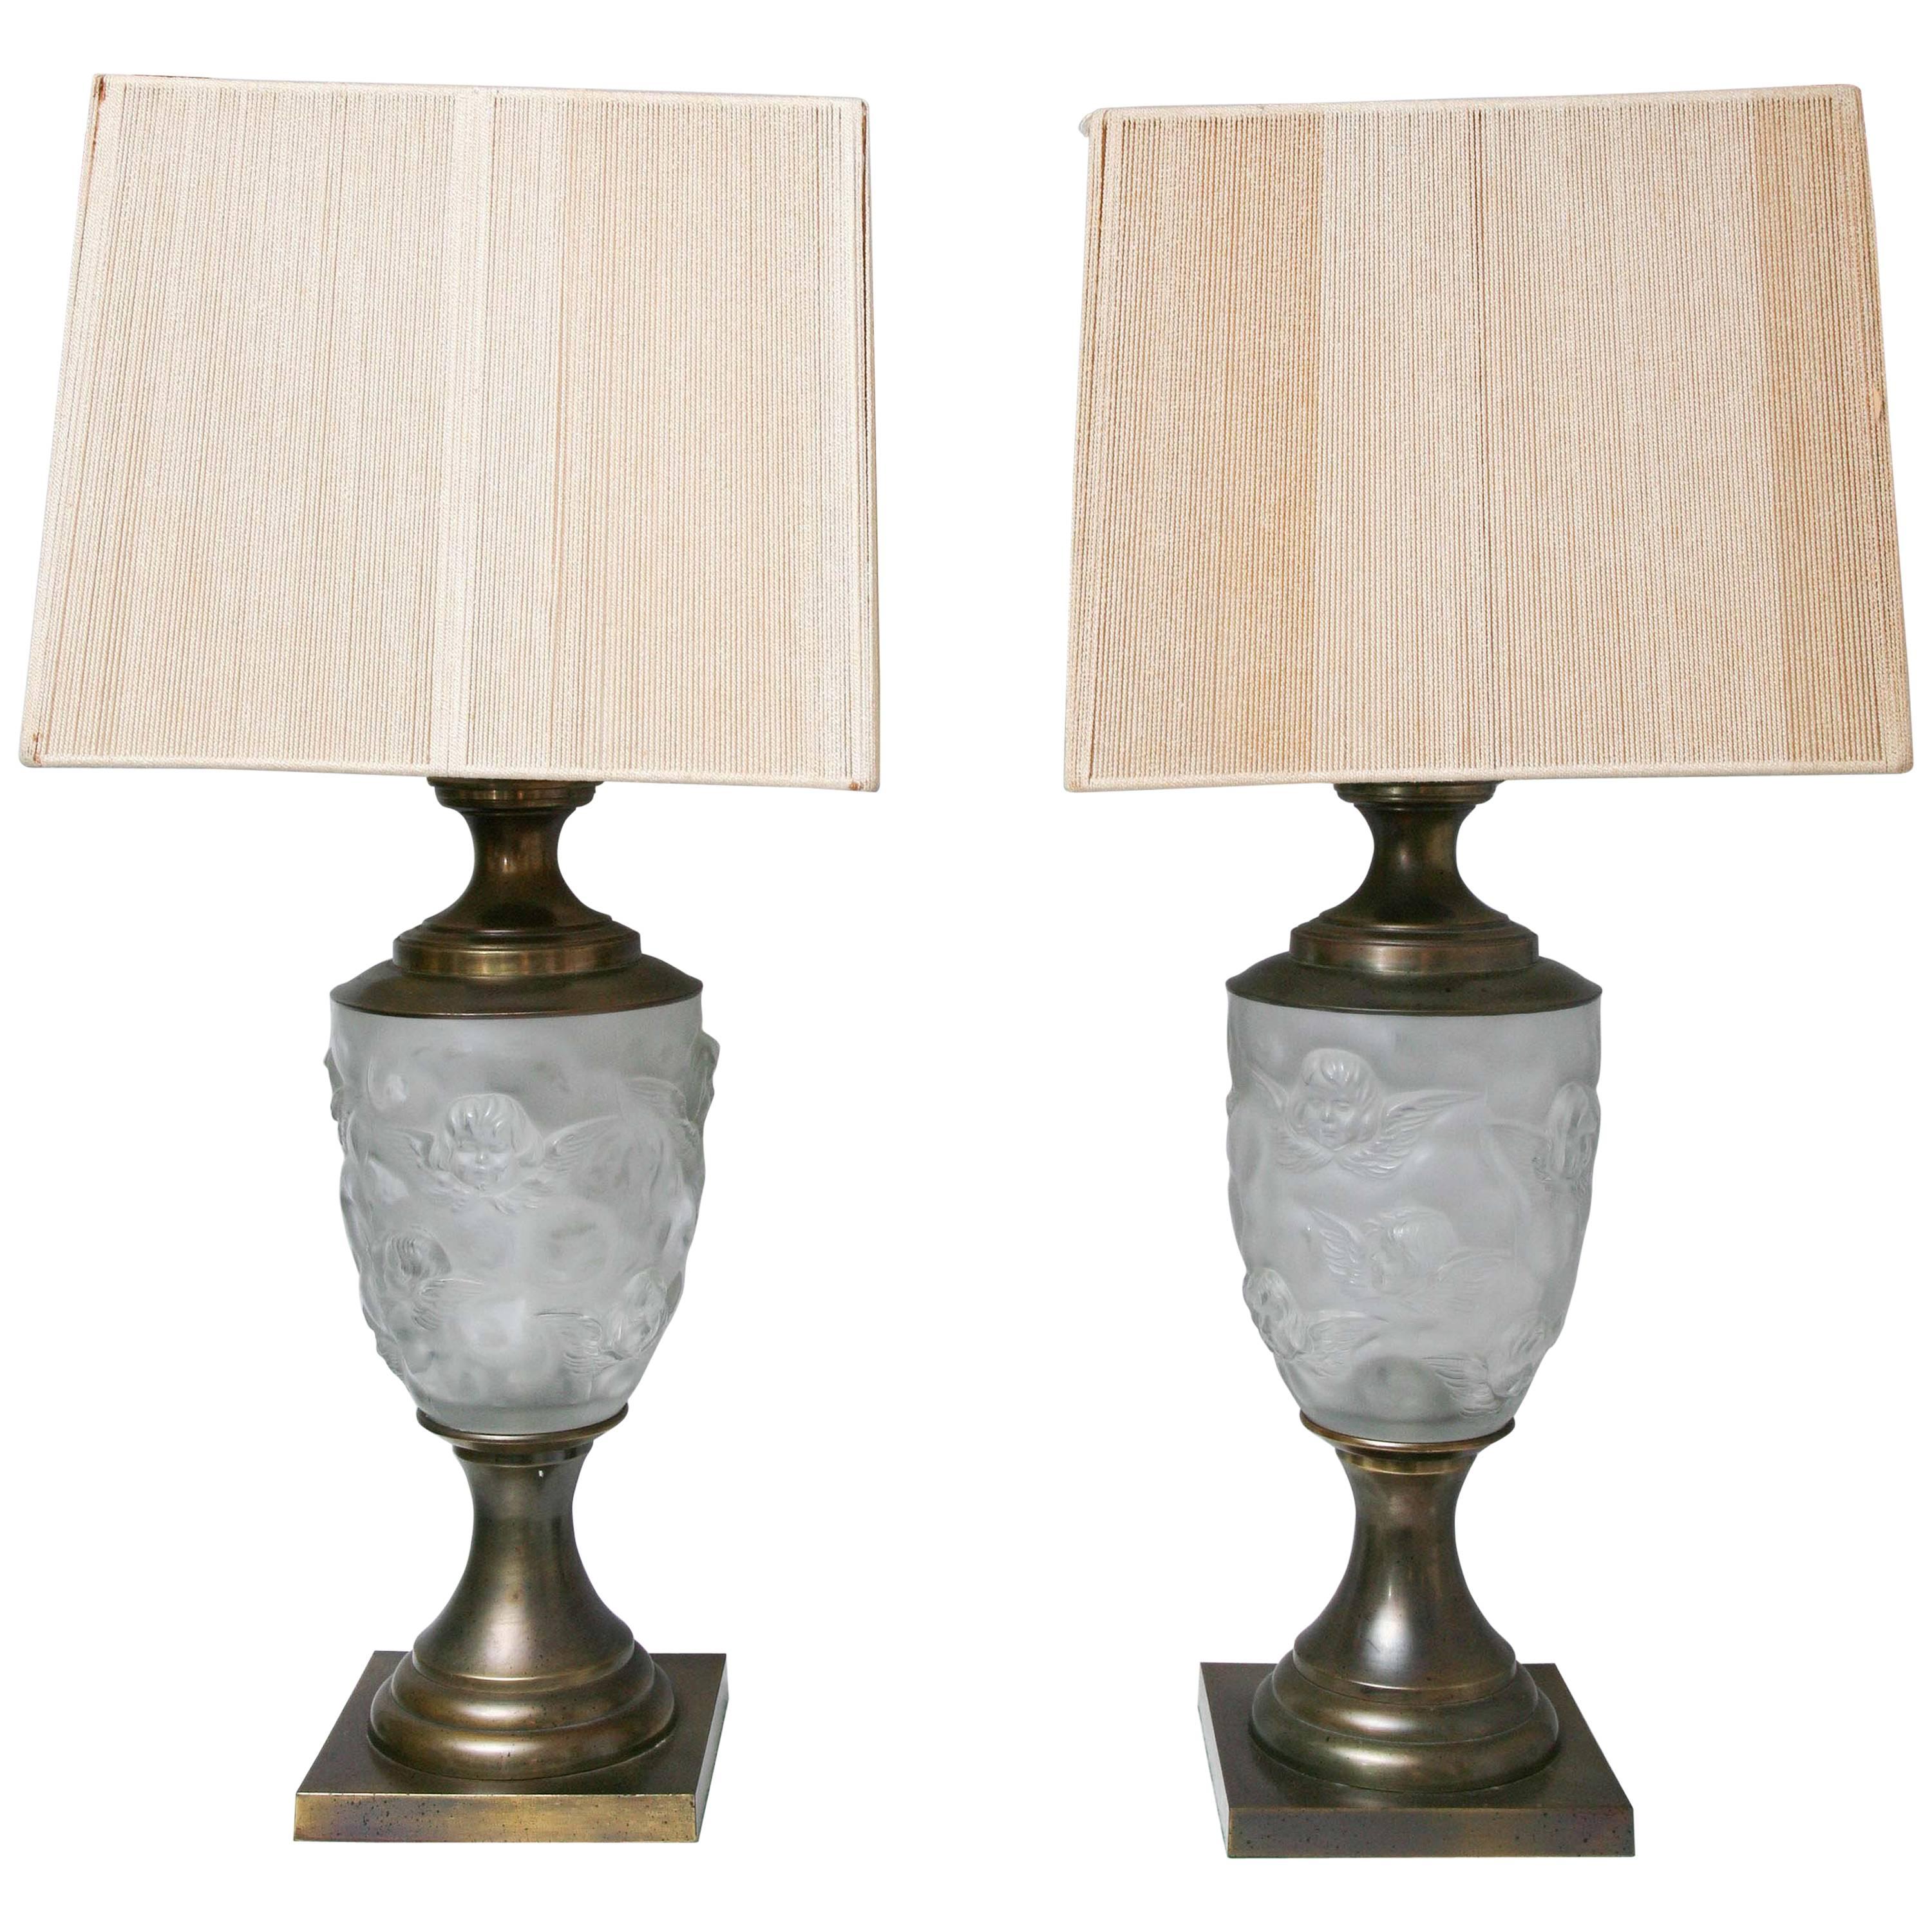 Pair of Hollywood Regency Lalique Style Brass / Glass Putti Table Lamps, Elegant For Sale